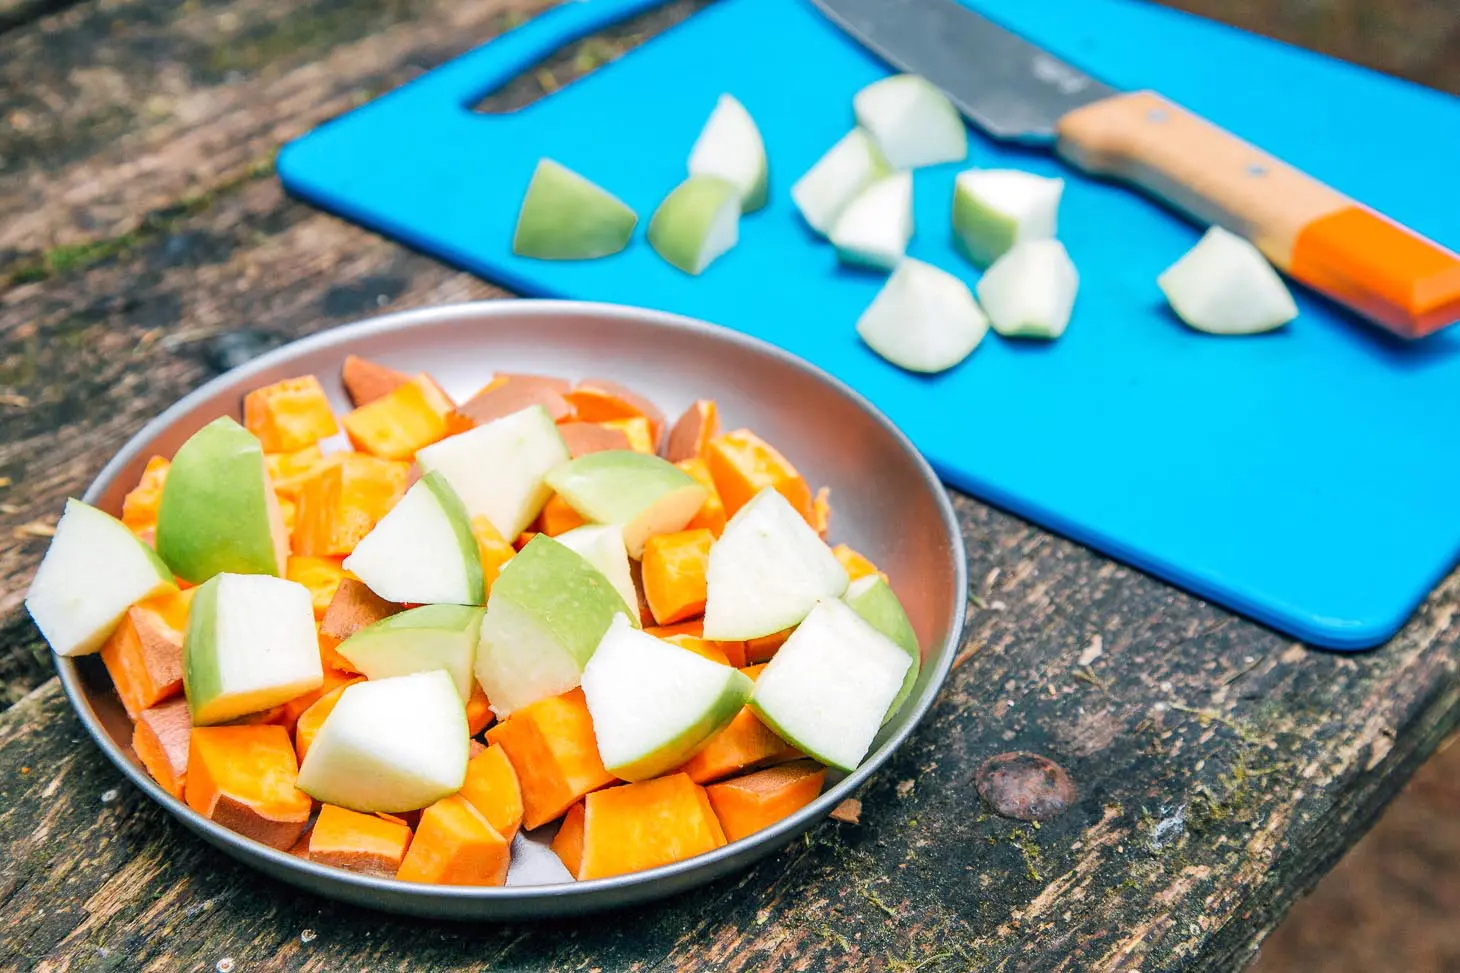 Chopped apples and sweet potatoes.